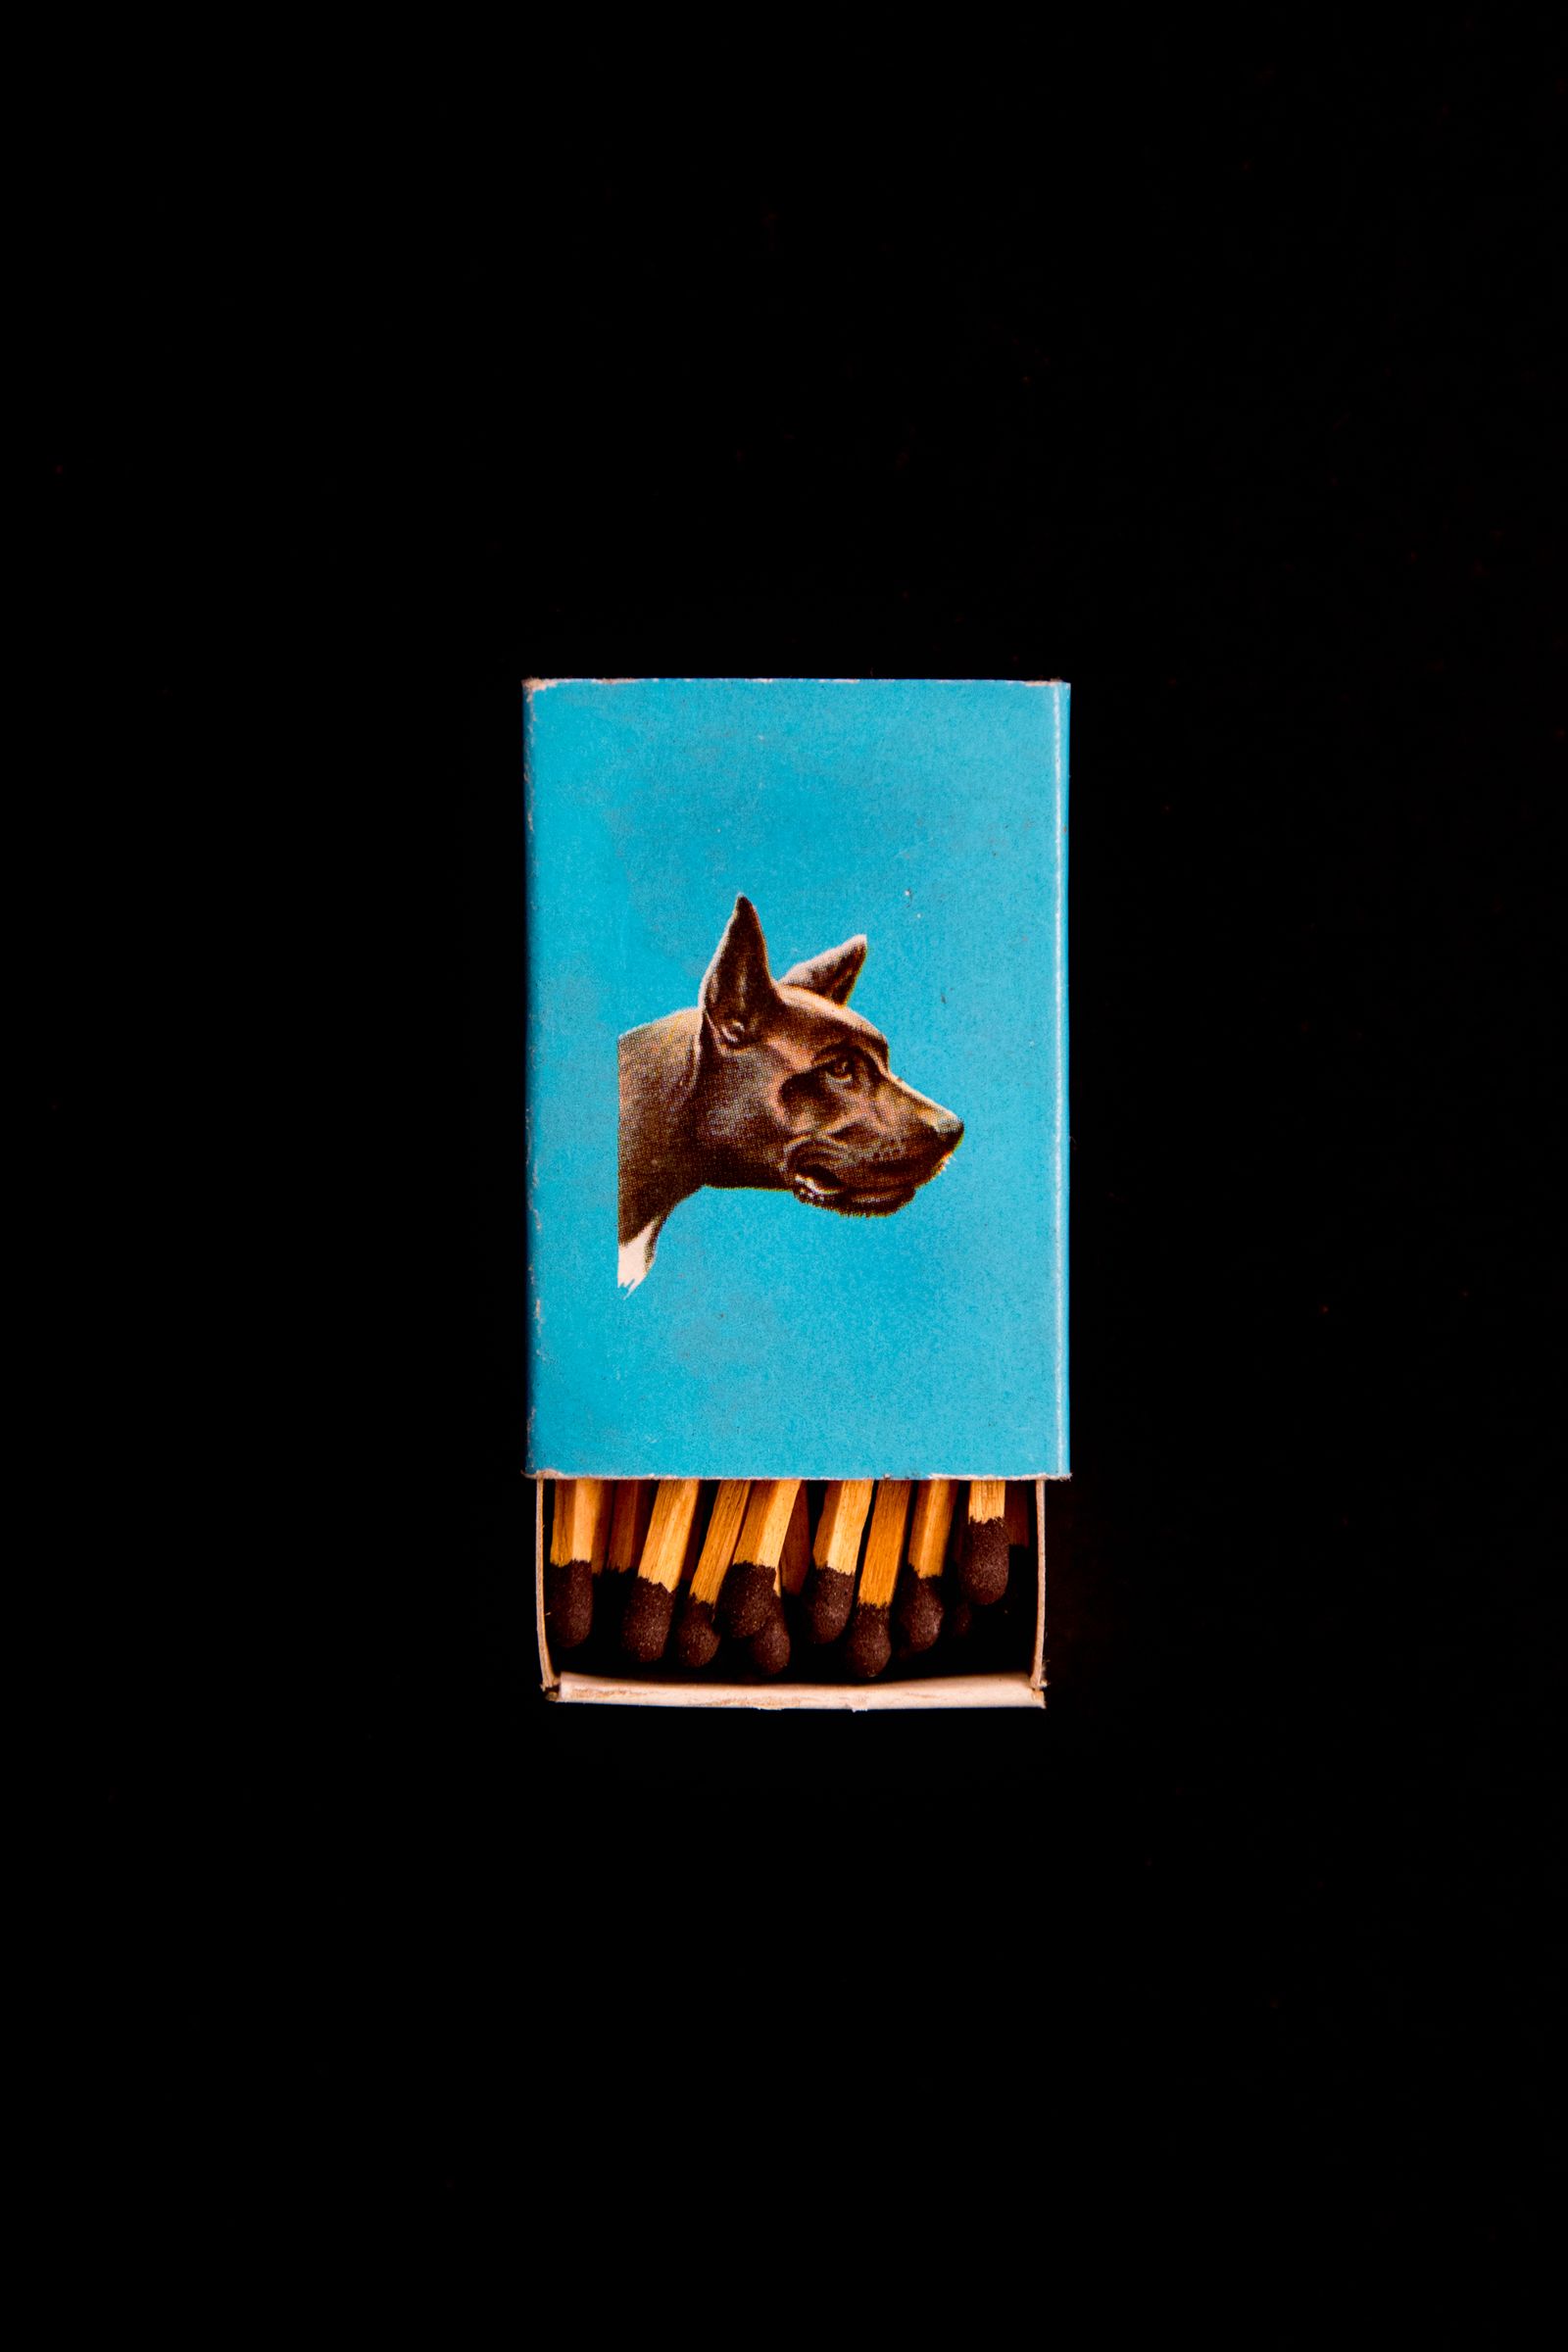 © Sofia Verzbolovskis - Image from the The Matchbook Years photography project